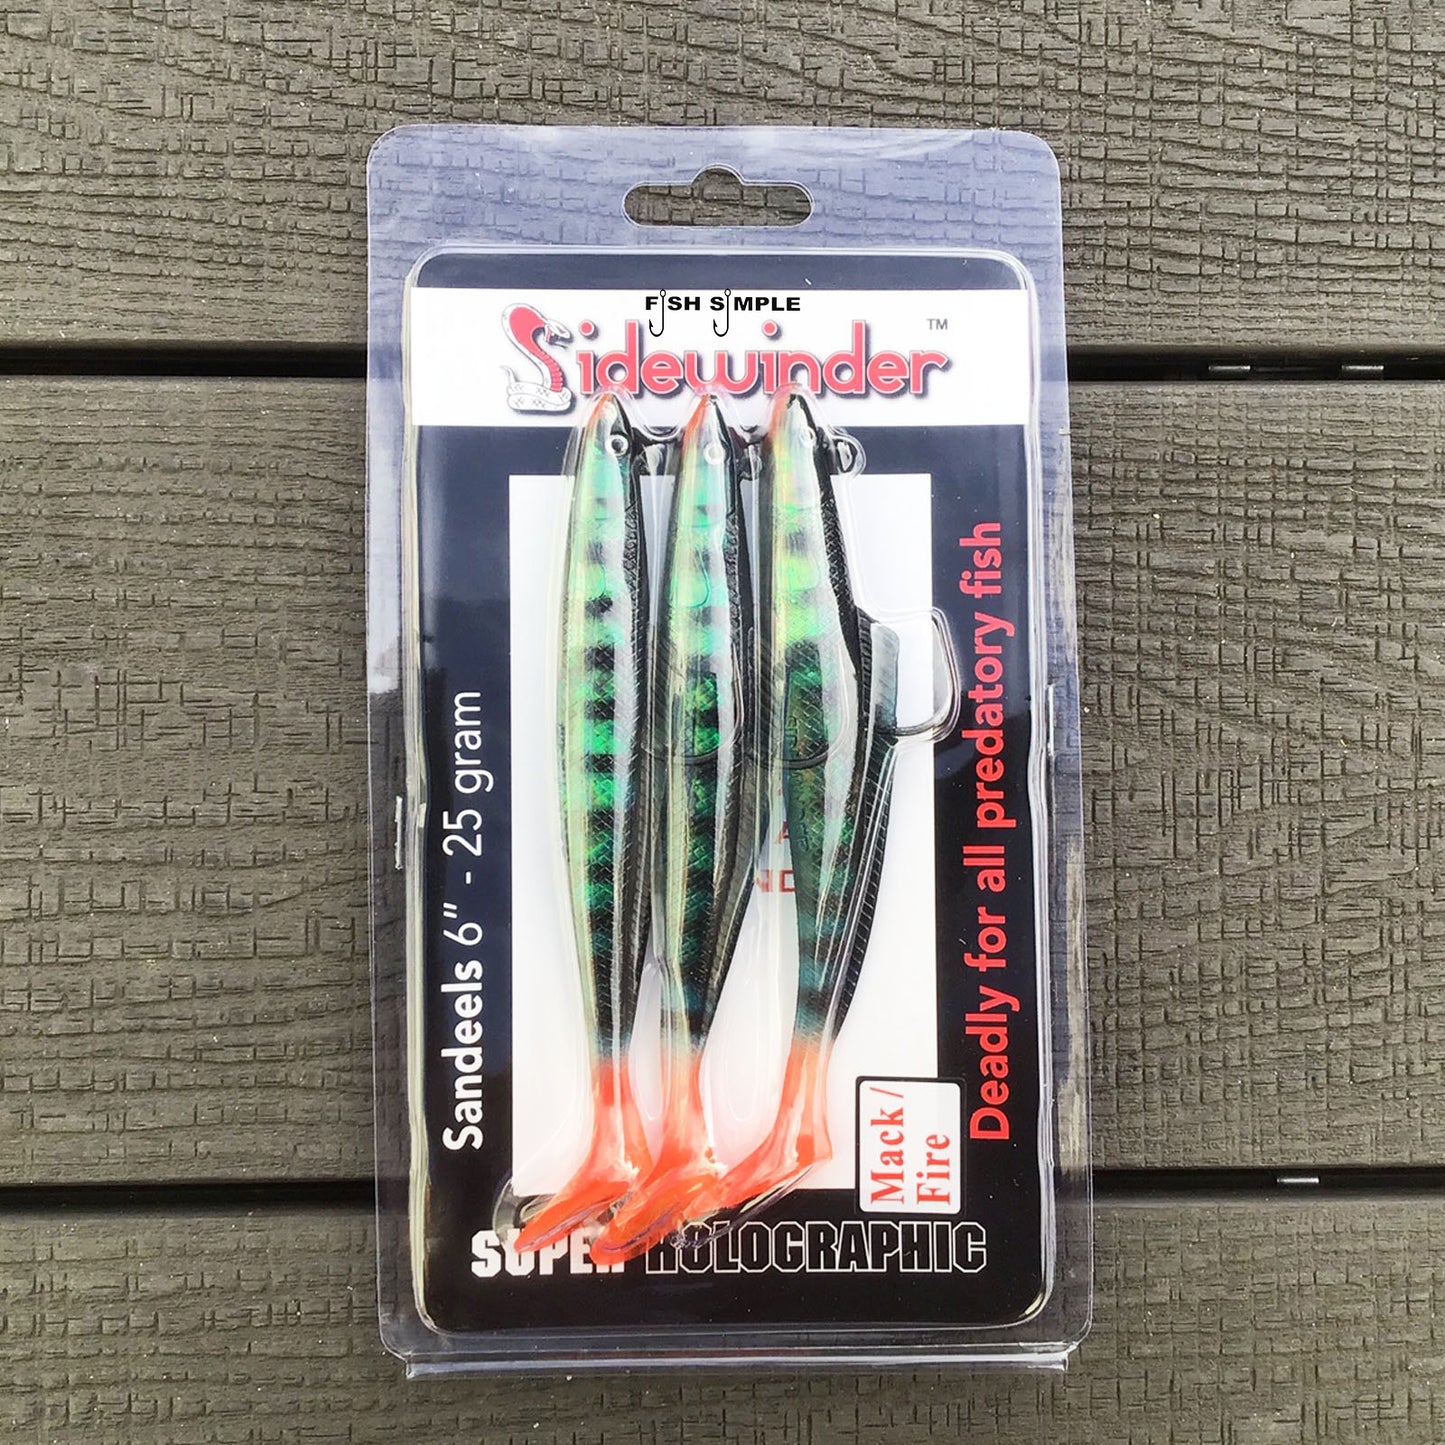 25% Off Sidewinder Lures & Fast Tracked Postage – Fish Simple